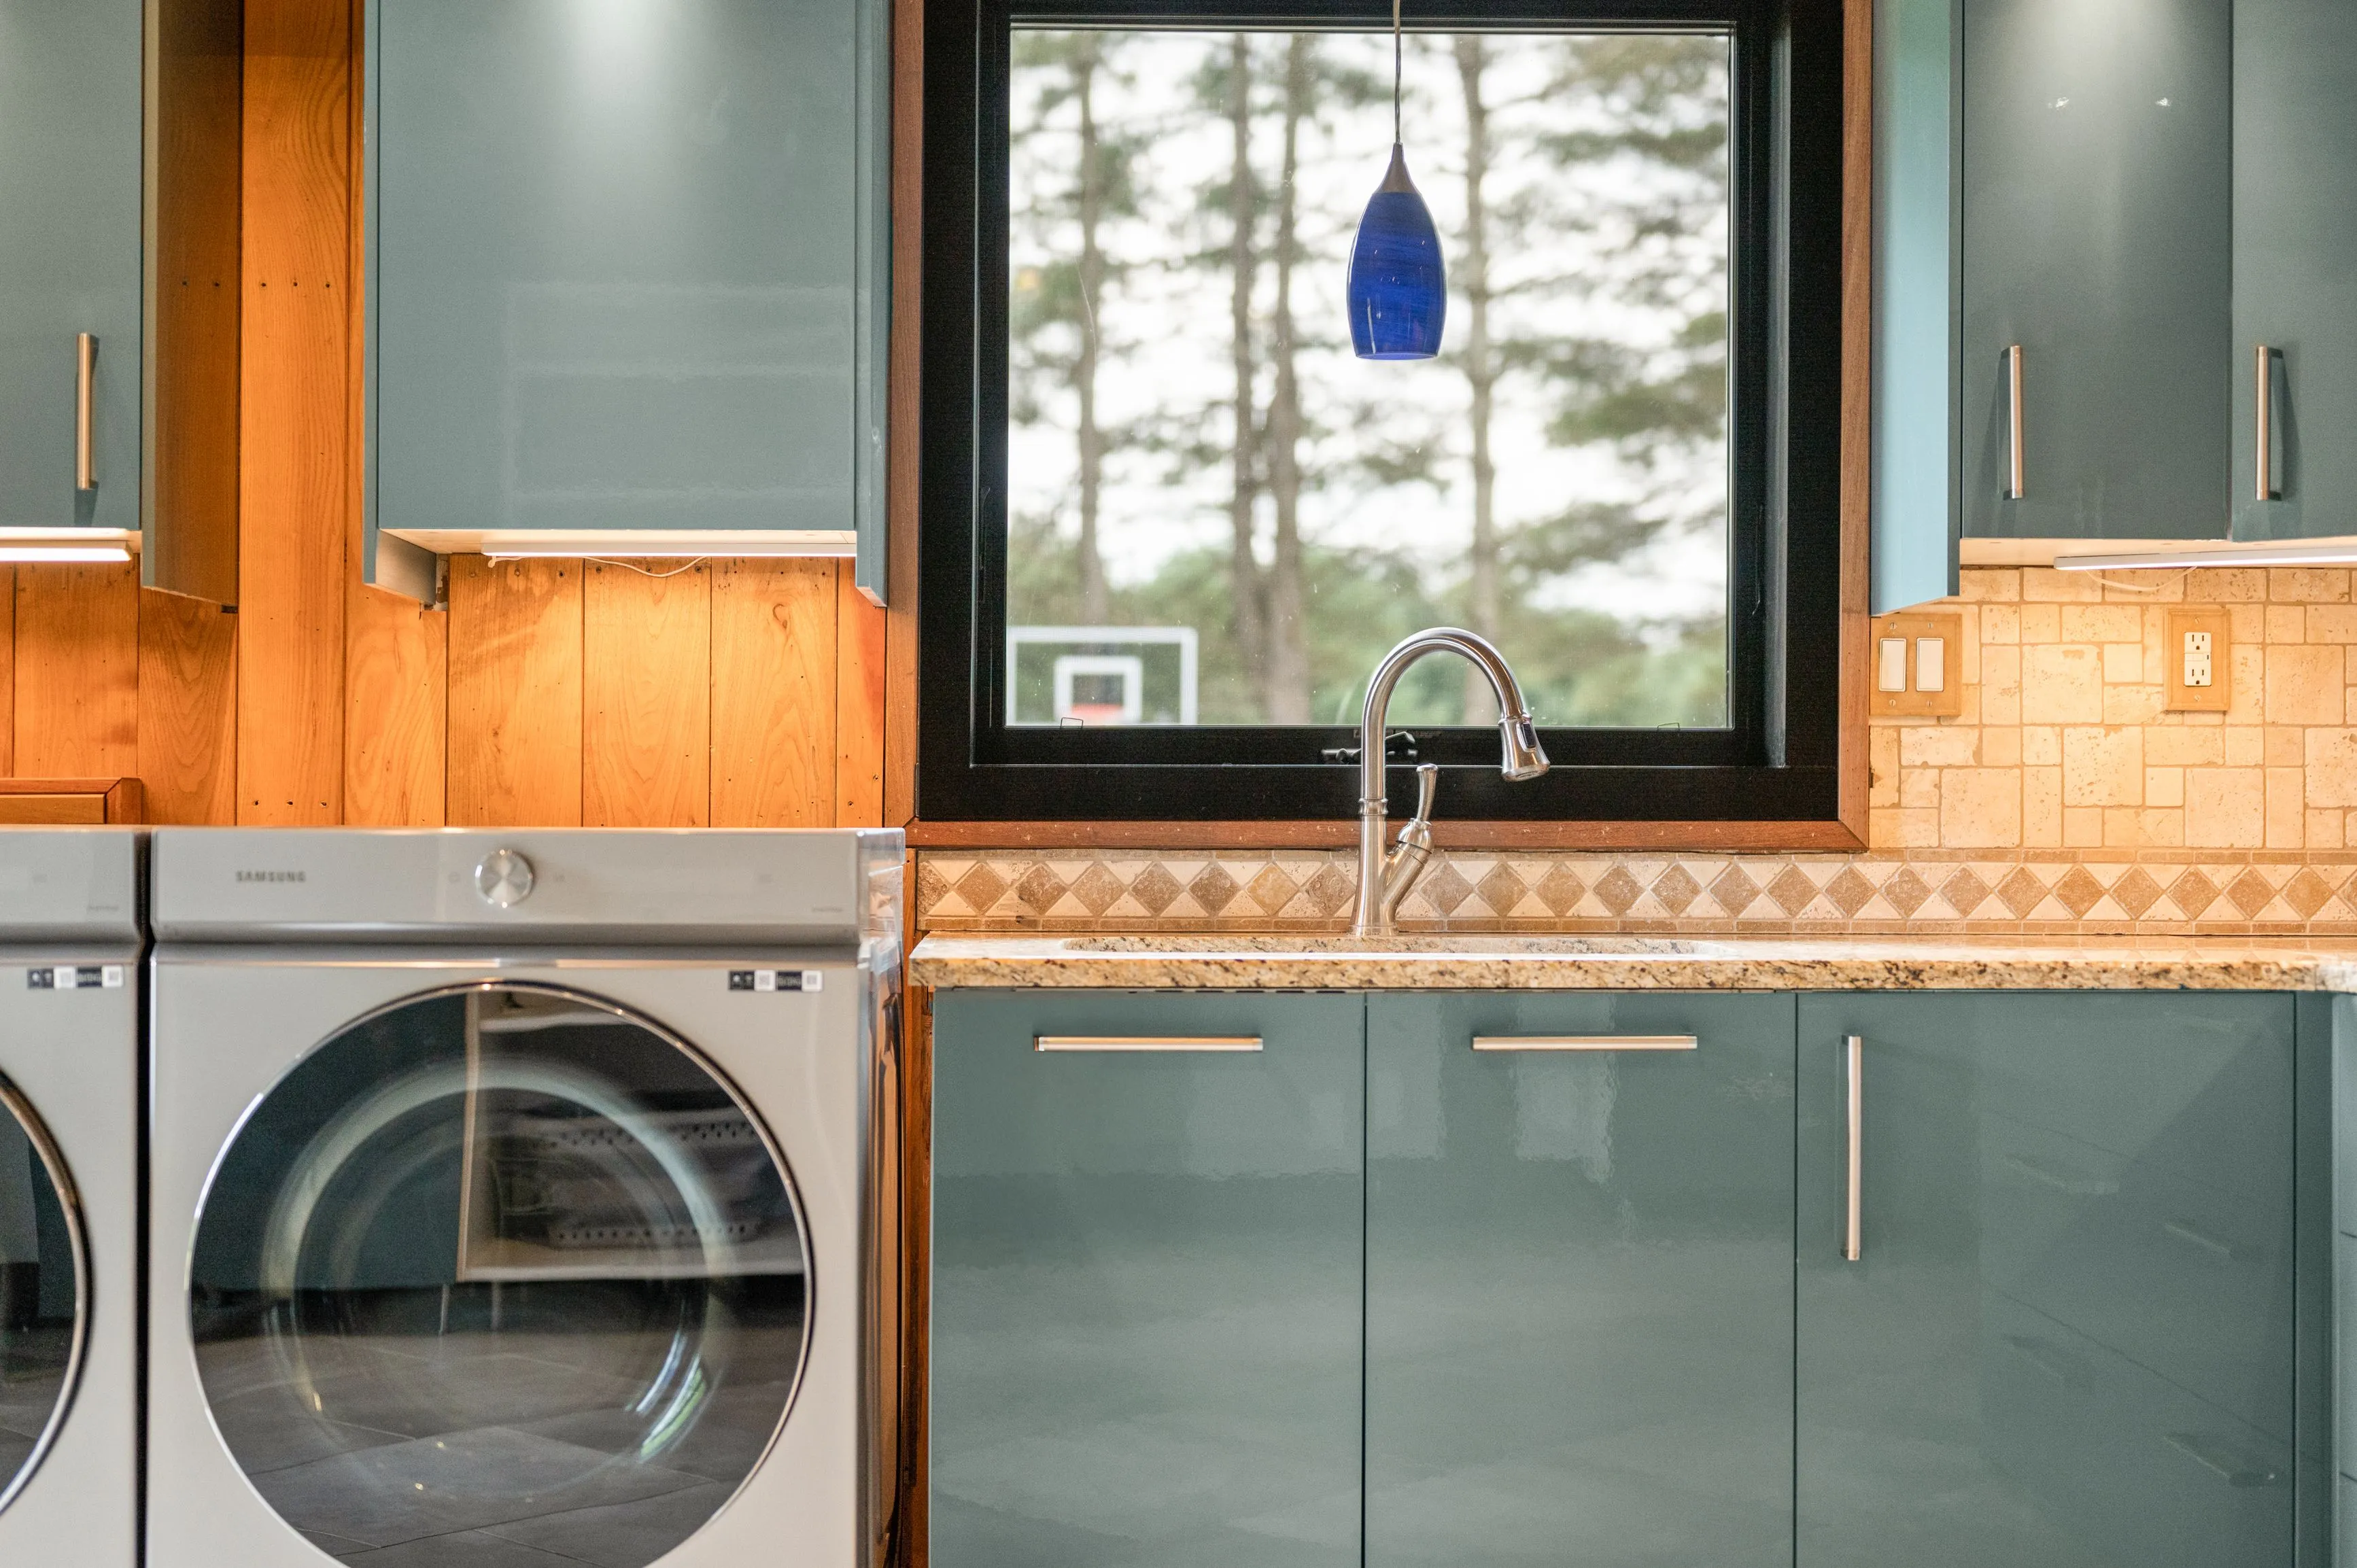 Modern laundry room featuring a front-loading washer and dryer, wooden cabinetry, and a kitchen sink with a window view.